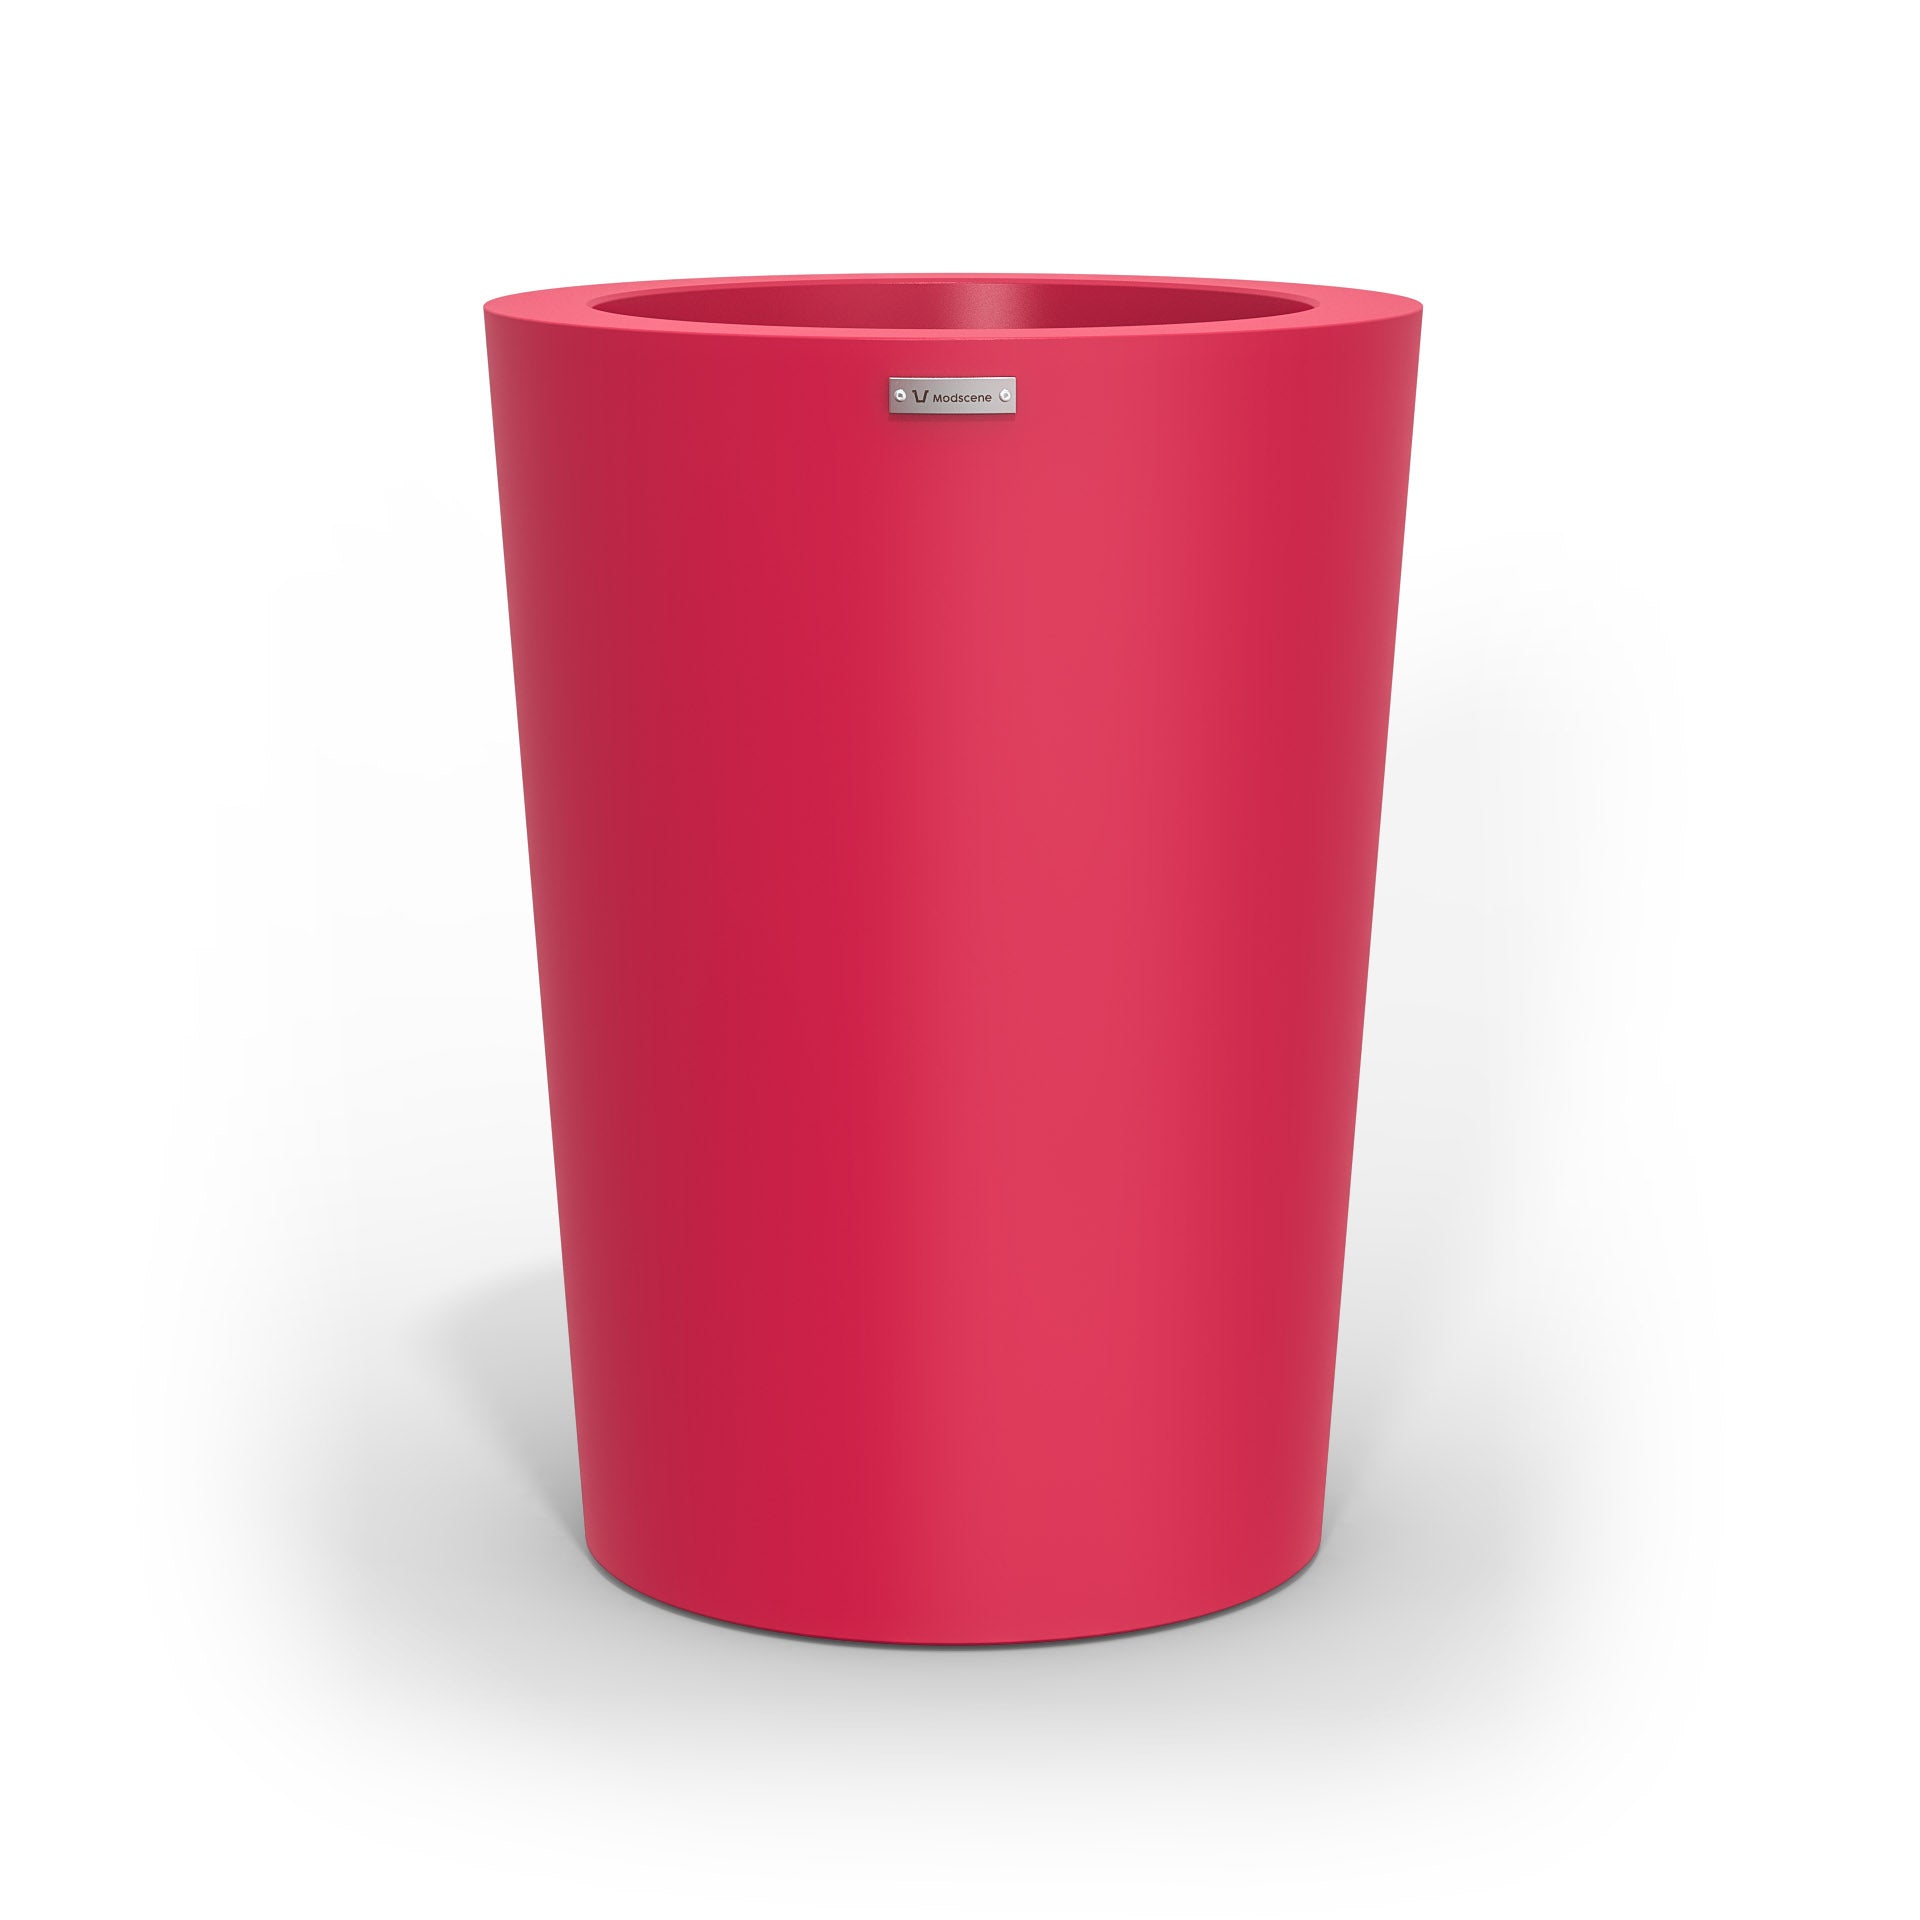 A modern style planter pot in pink. Made by Modscene NZ.